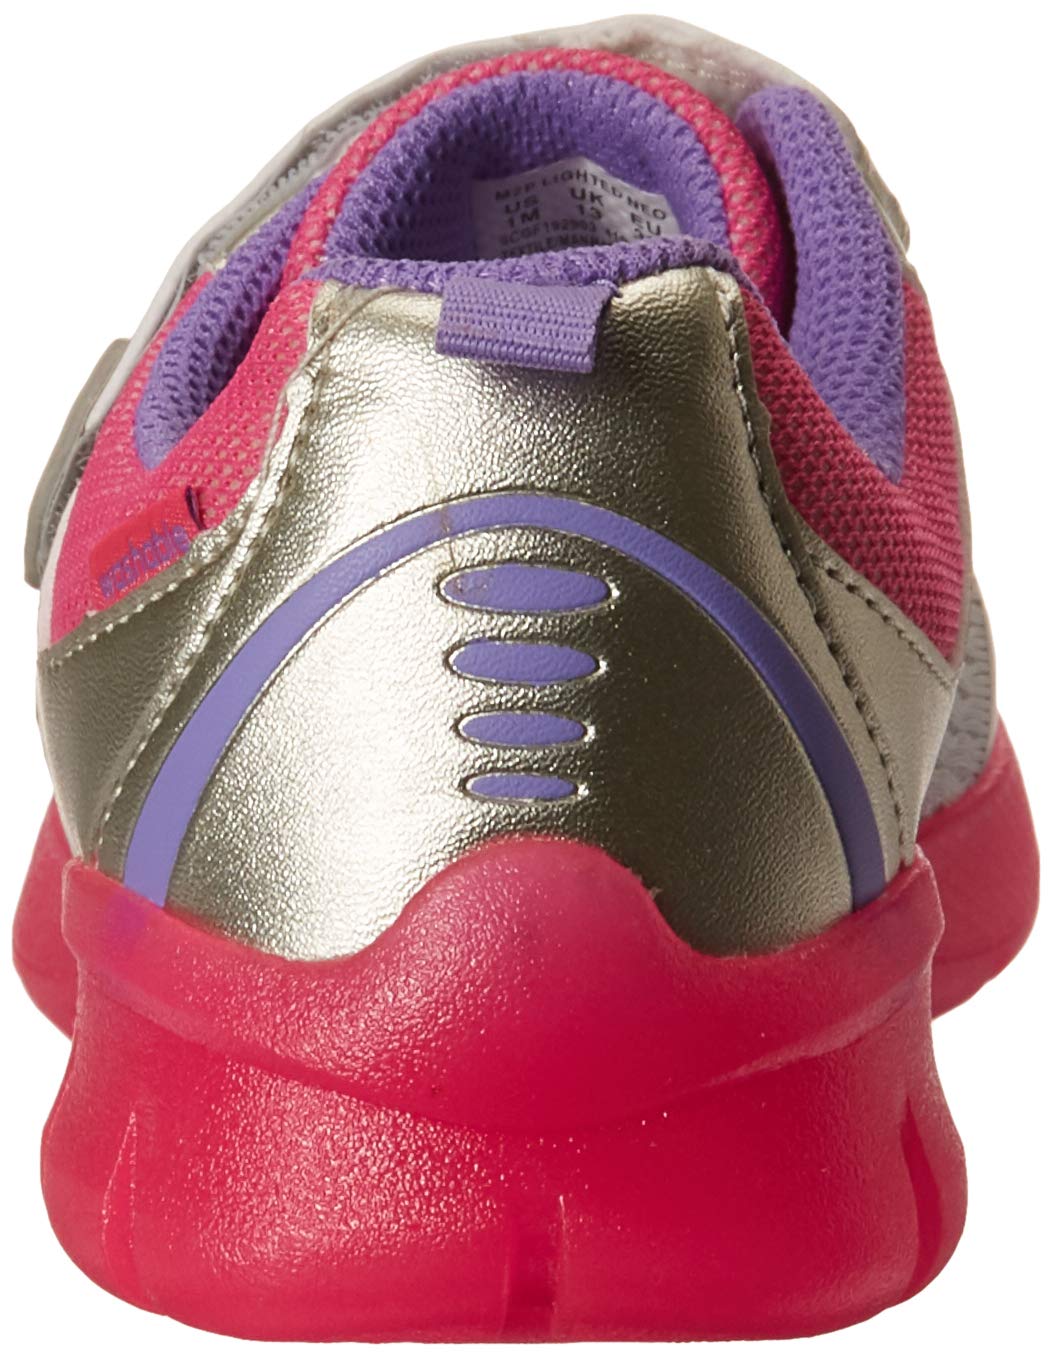 Stride Rite Kids' Made2play Lighted Neo Sneaker